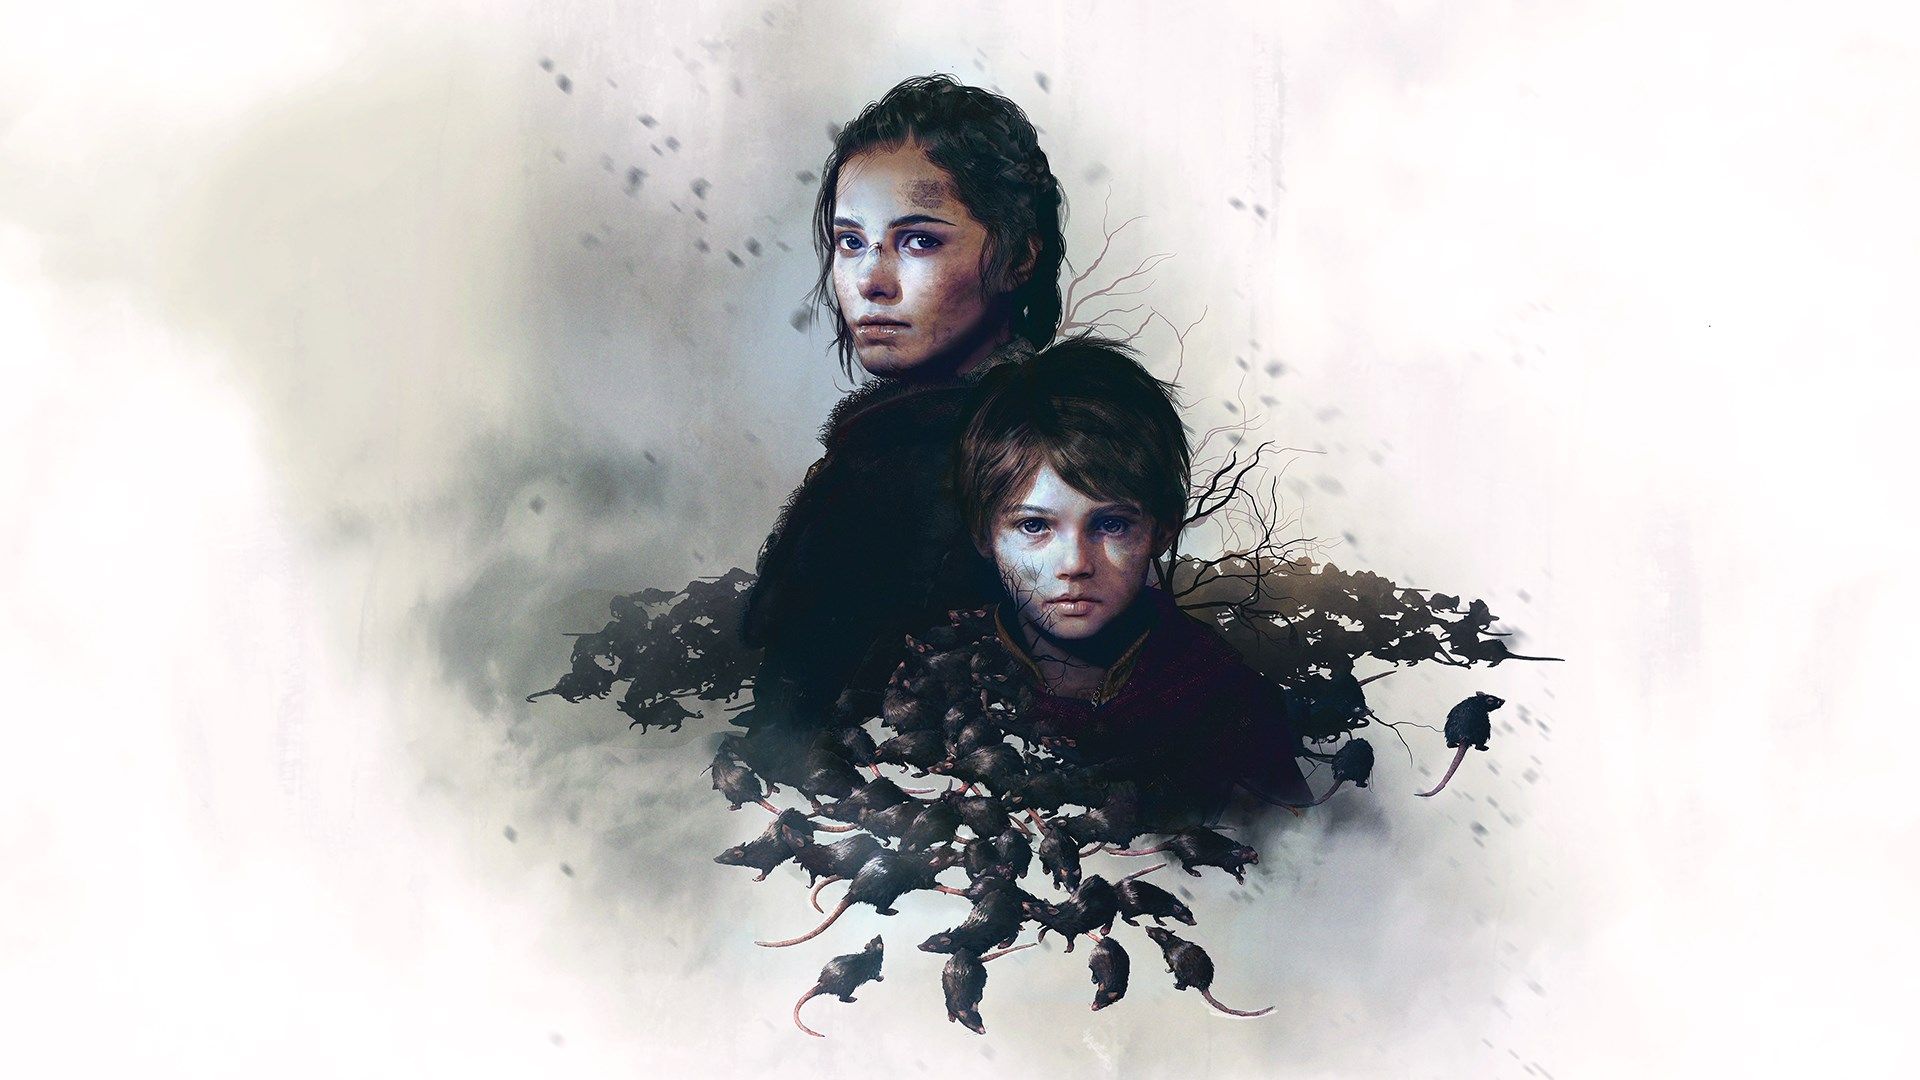 9 Lingering Questions We Have After The End Of A Plague Tale: Innocence